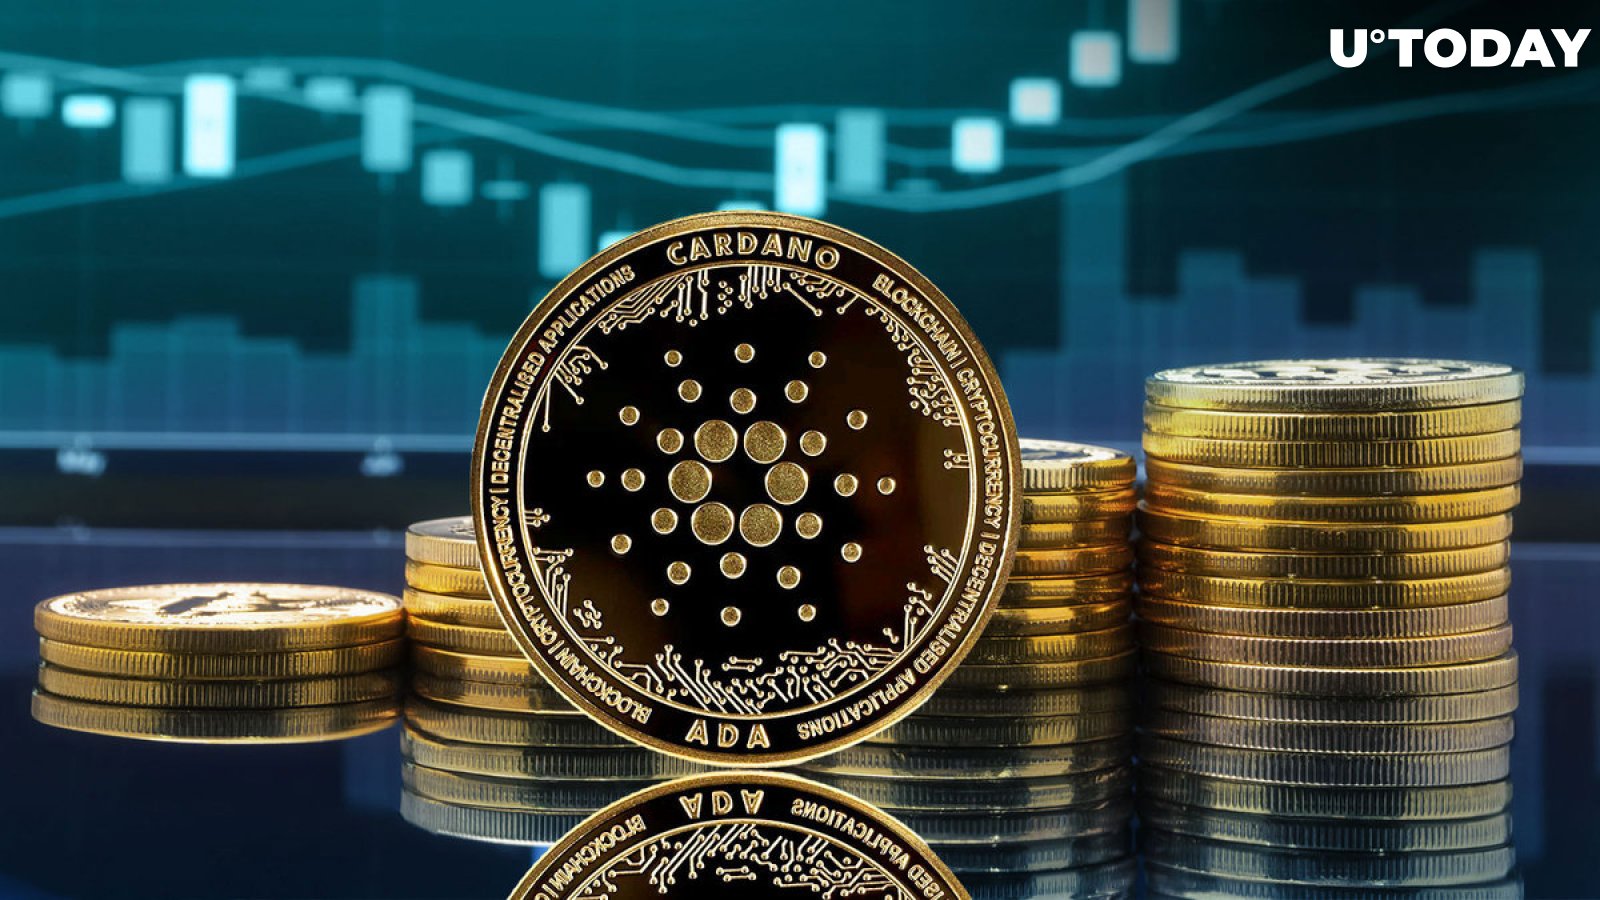 Cardano (ADA) Price Aims for Epic 15% Upside, But There's Barrier to Overcome